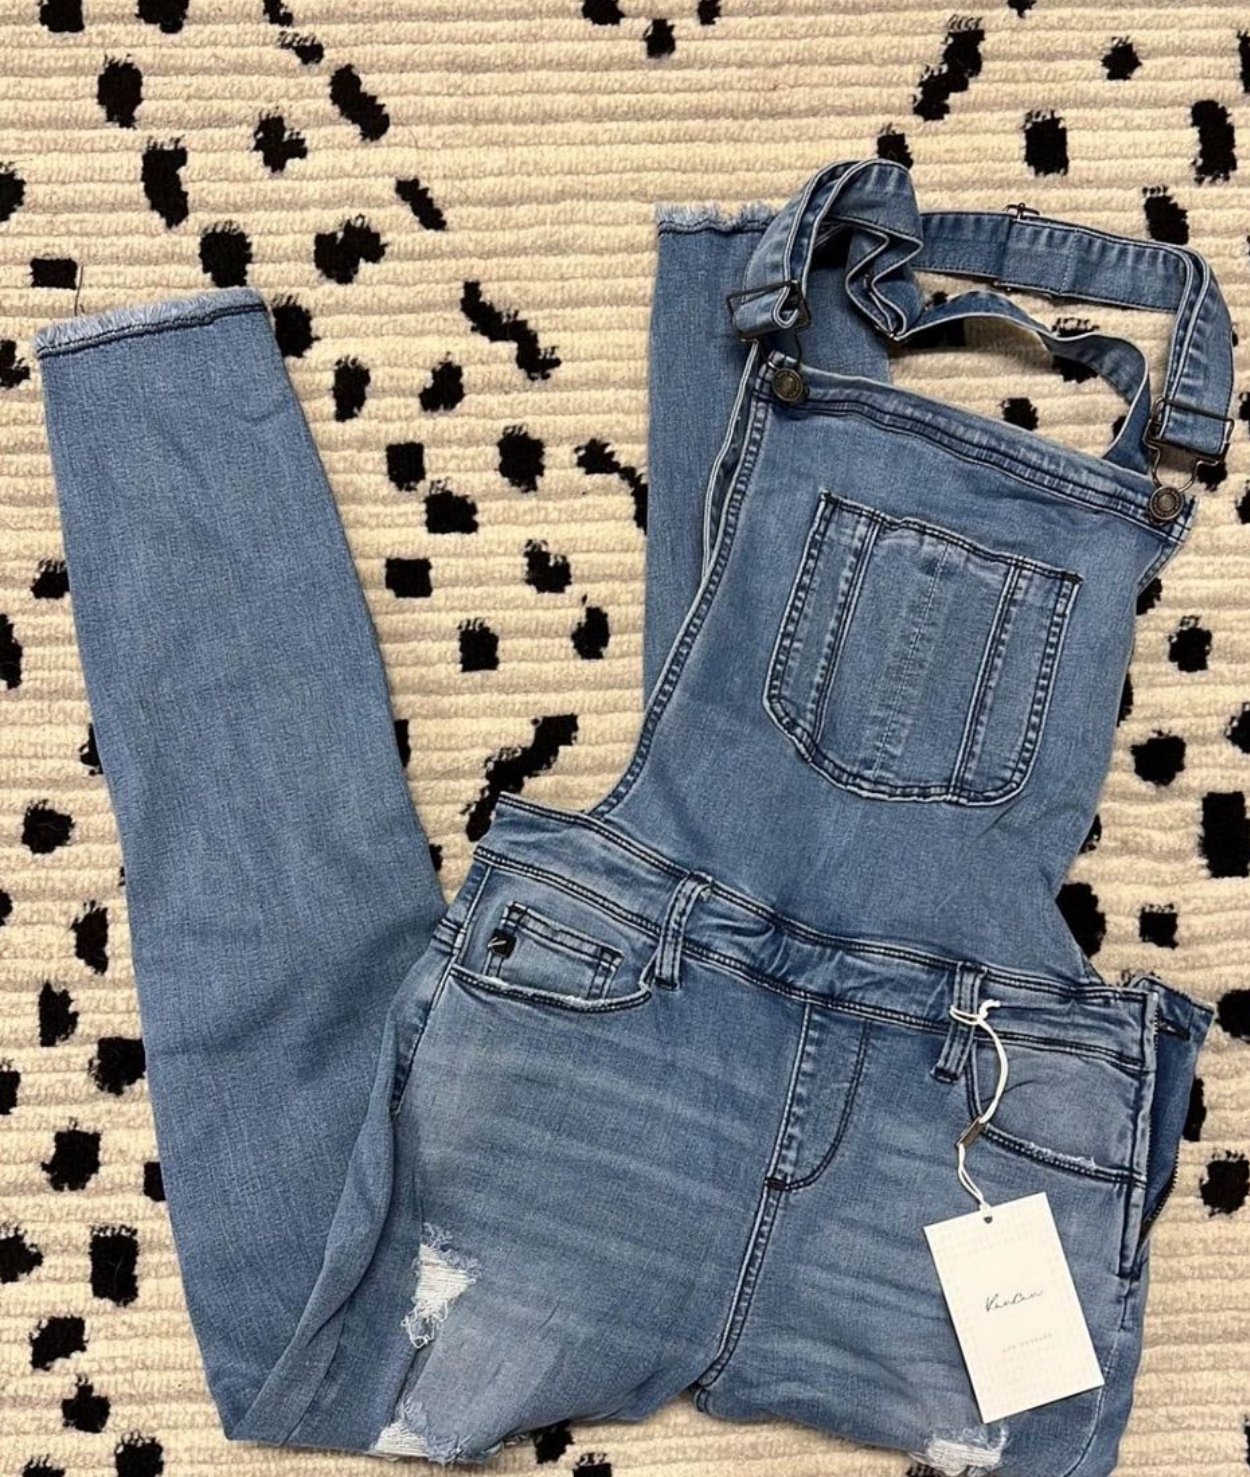 Promotions  NWOT Boutique Kancan Overalls jI9gWxeO3 well sale